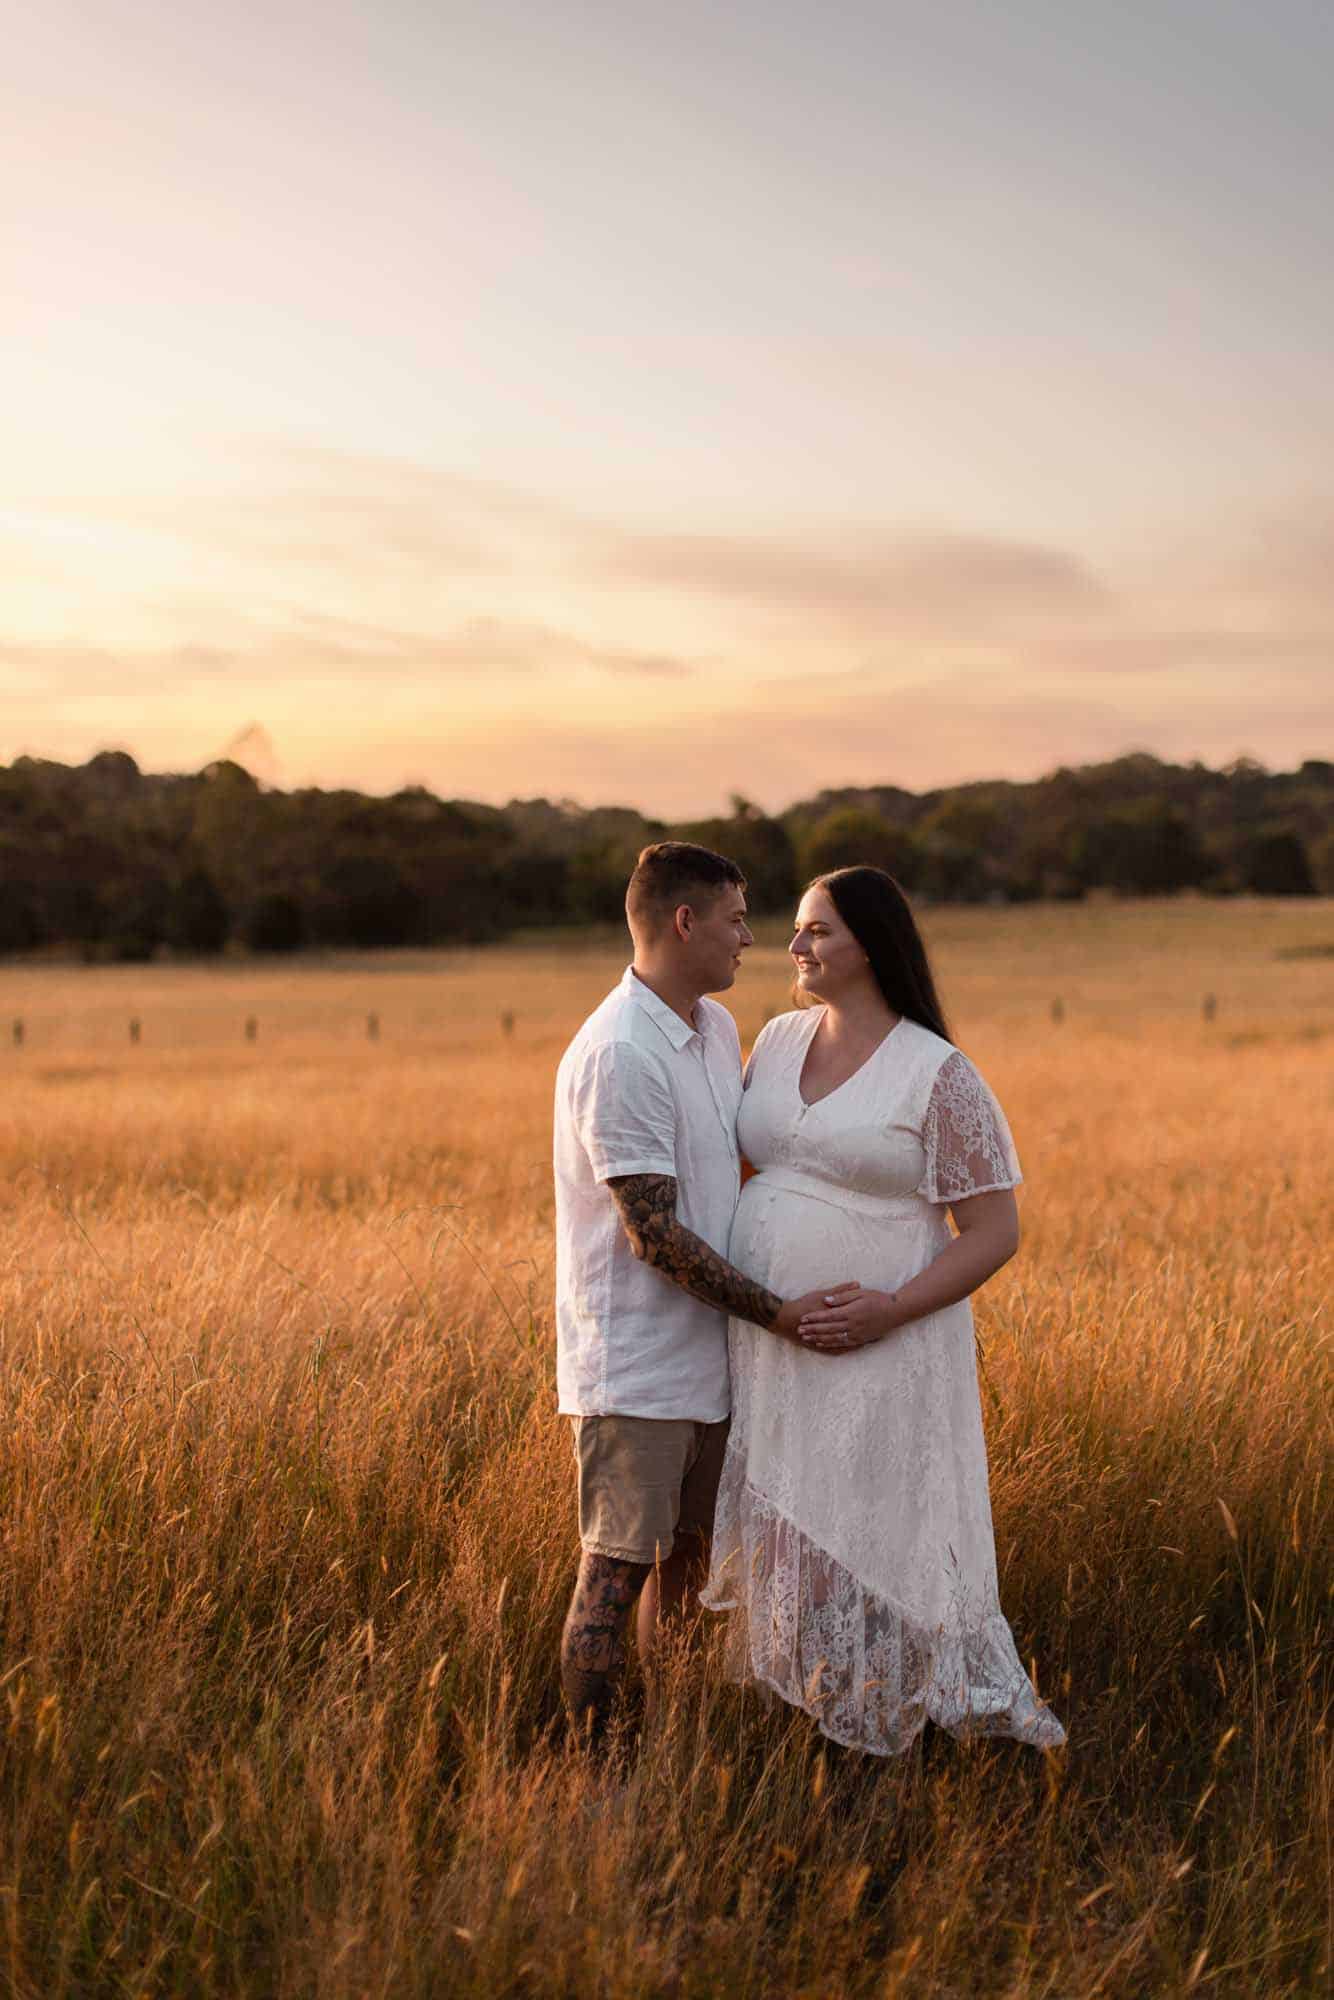 A couple embracing the woman's pregnant belly in field with long grass during a golden sunset